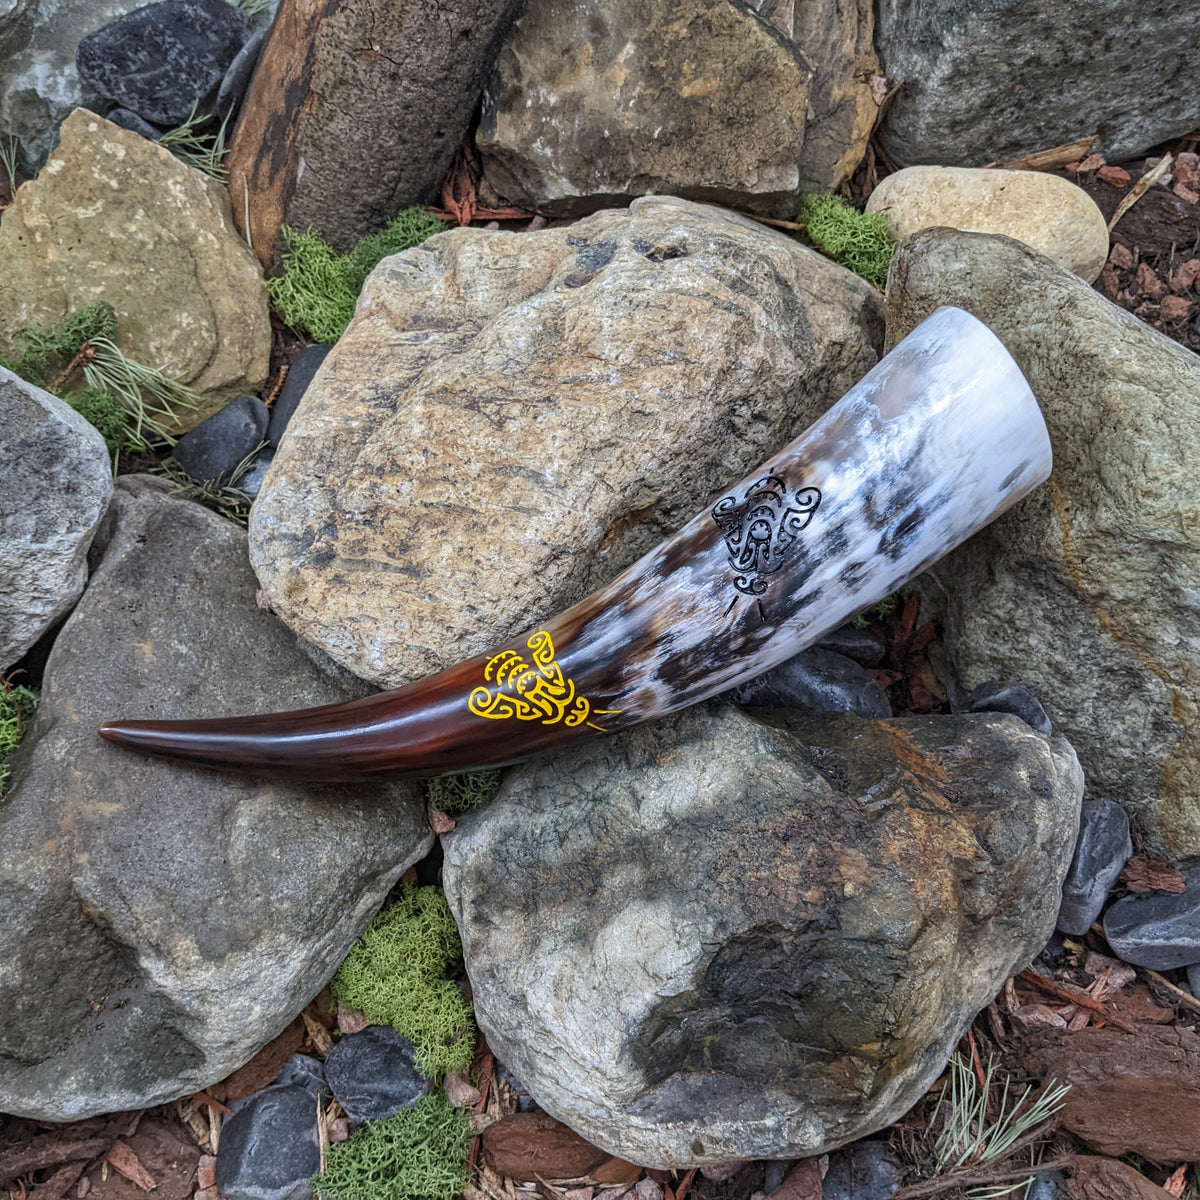 Handmade Bee Drinking Horn, Black and Gold Bee design, hand-carved into genuine cow horn